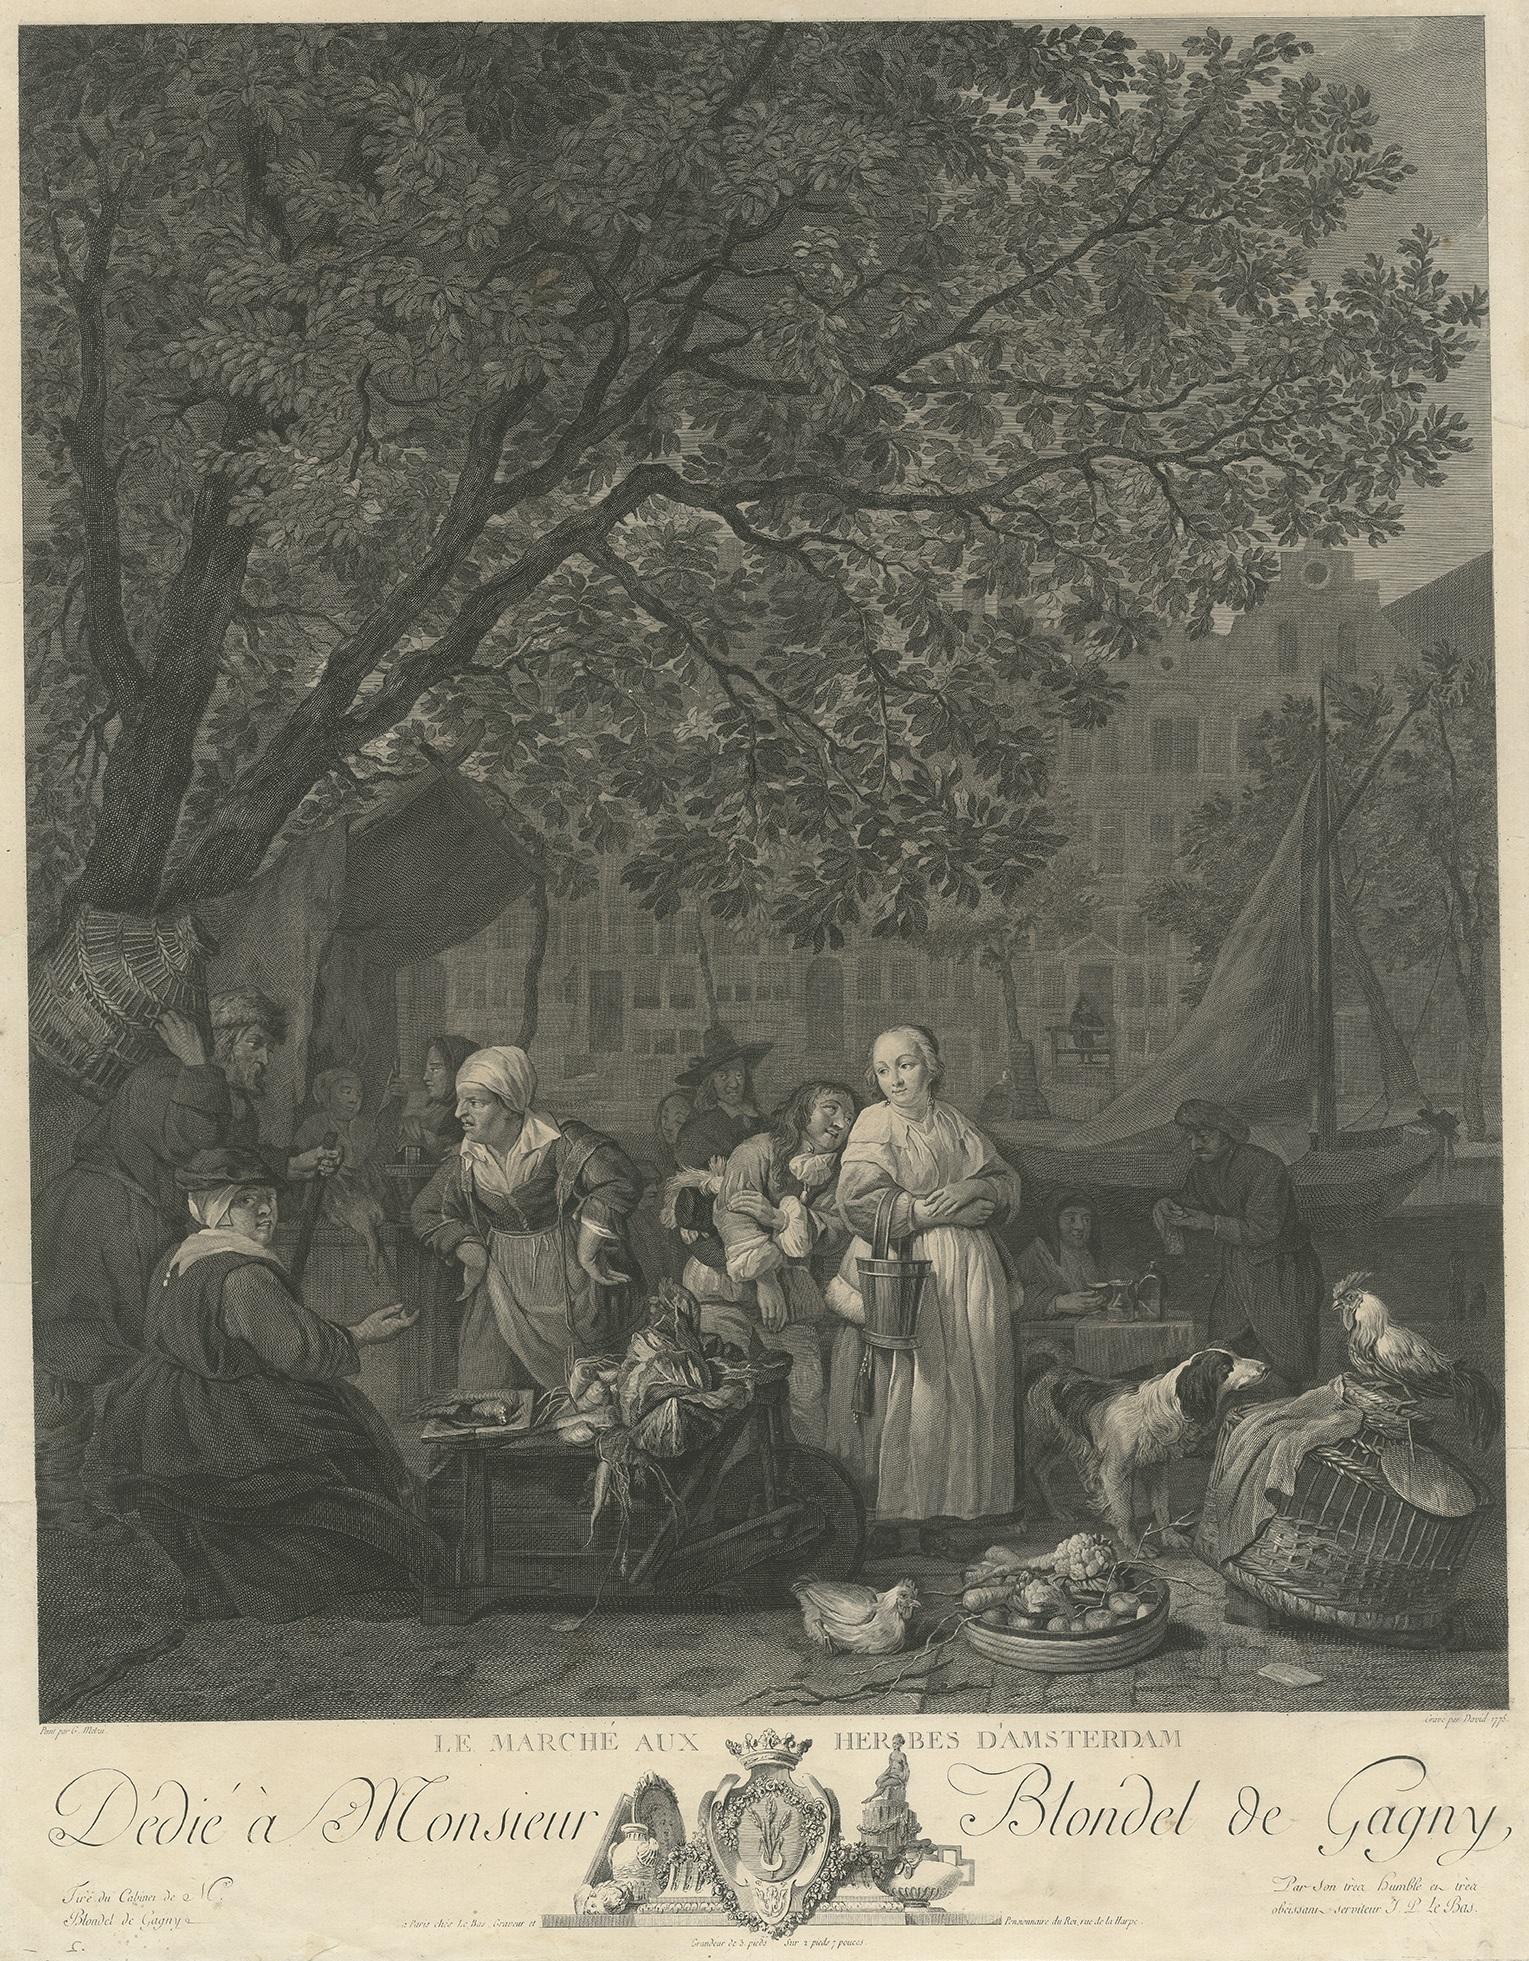 Antique print titled 'Le Marché aux Herbes d'Amsterdam'. Large print of the vegetable market in Amsterdam, the Netherlands. It shows a group of Dutch peasants selling and buying vegetables and poultry outside a town in the shade of a large tree at